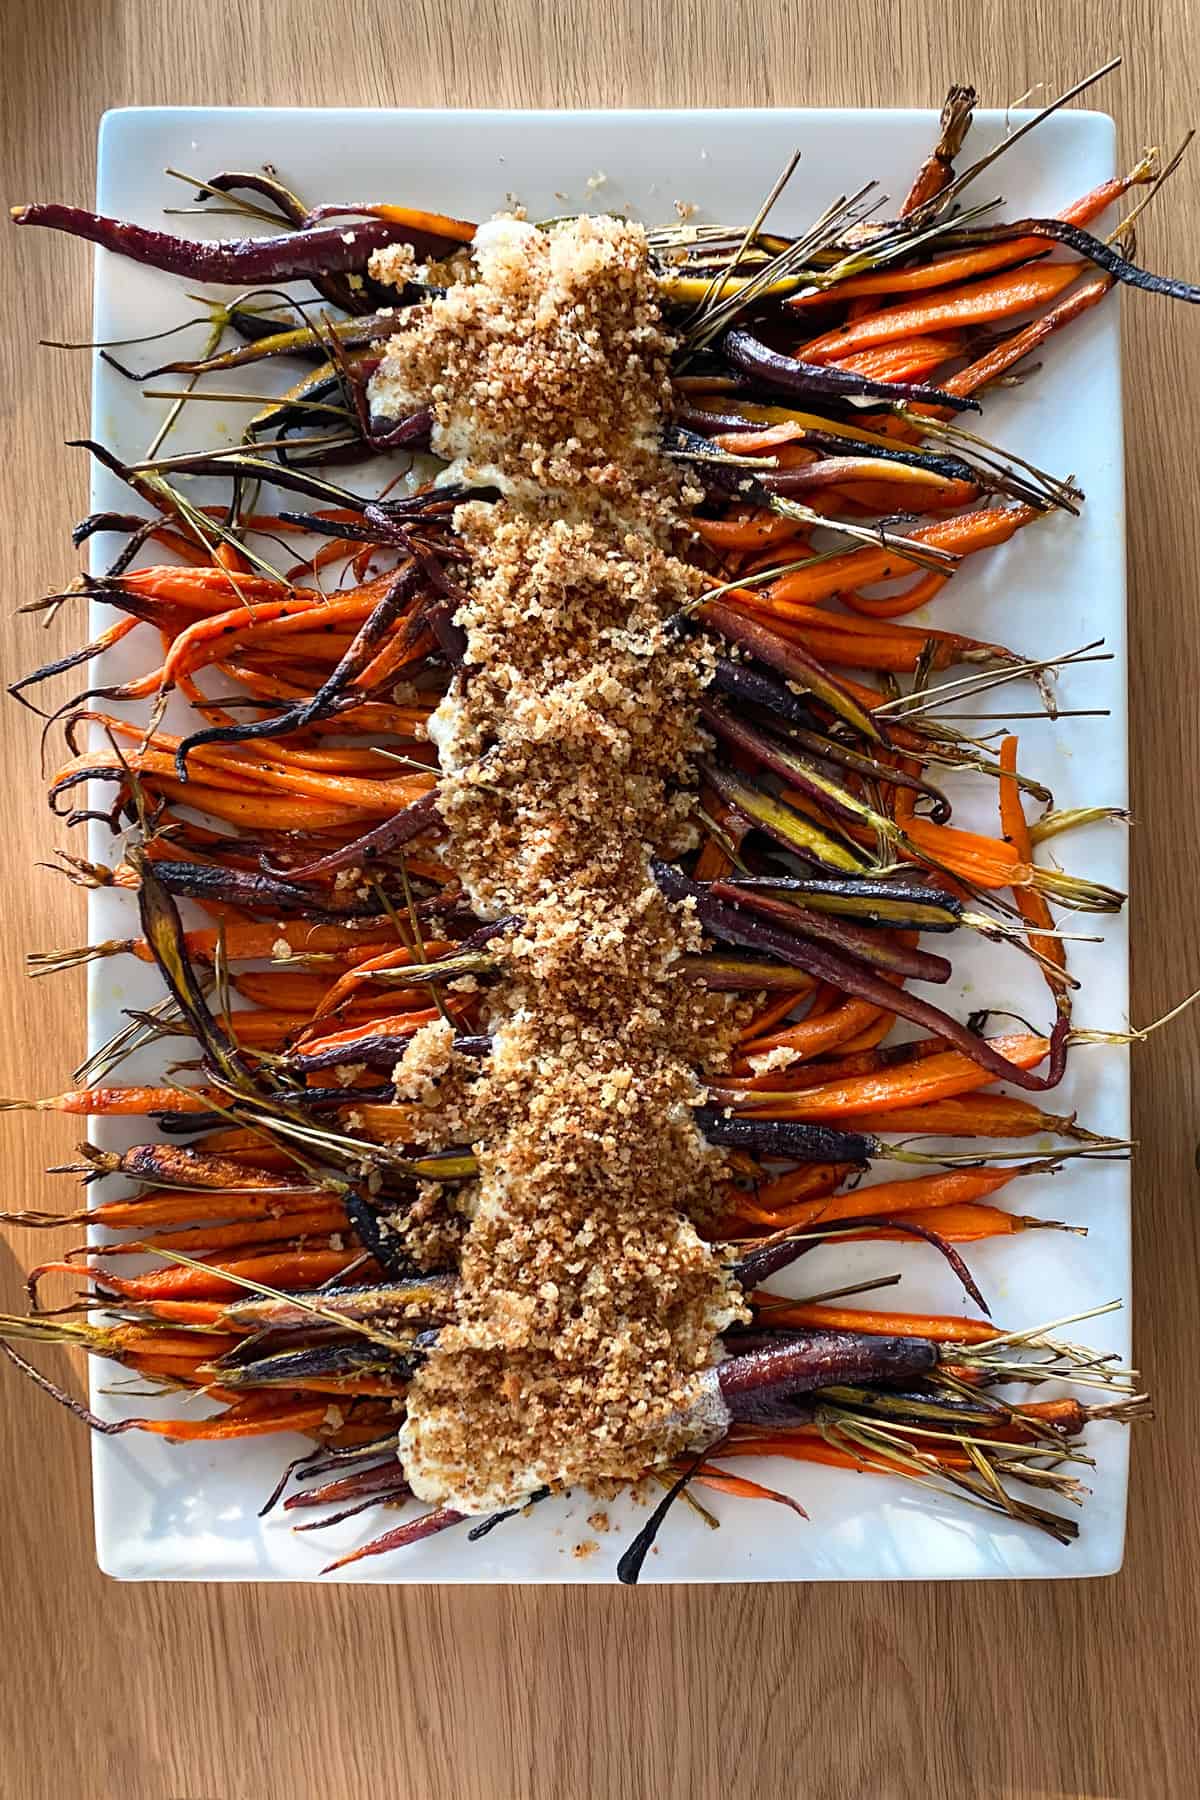 roasted rainbow carrots on a platter topped with whipped feta and bread crumbs down the center.